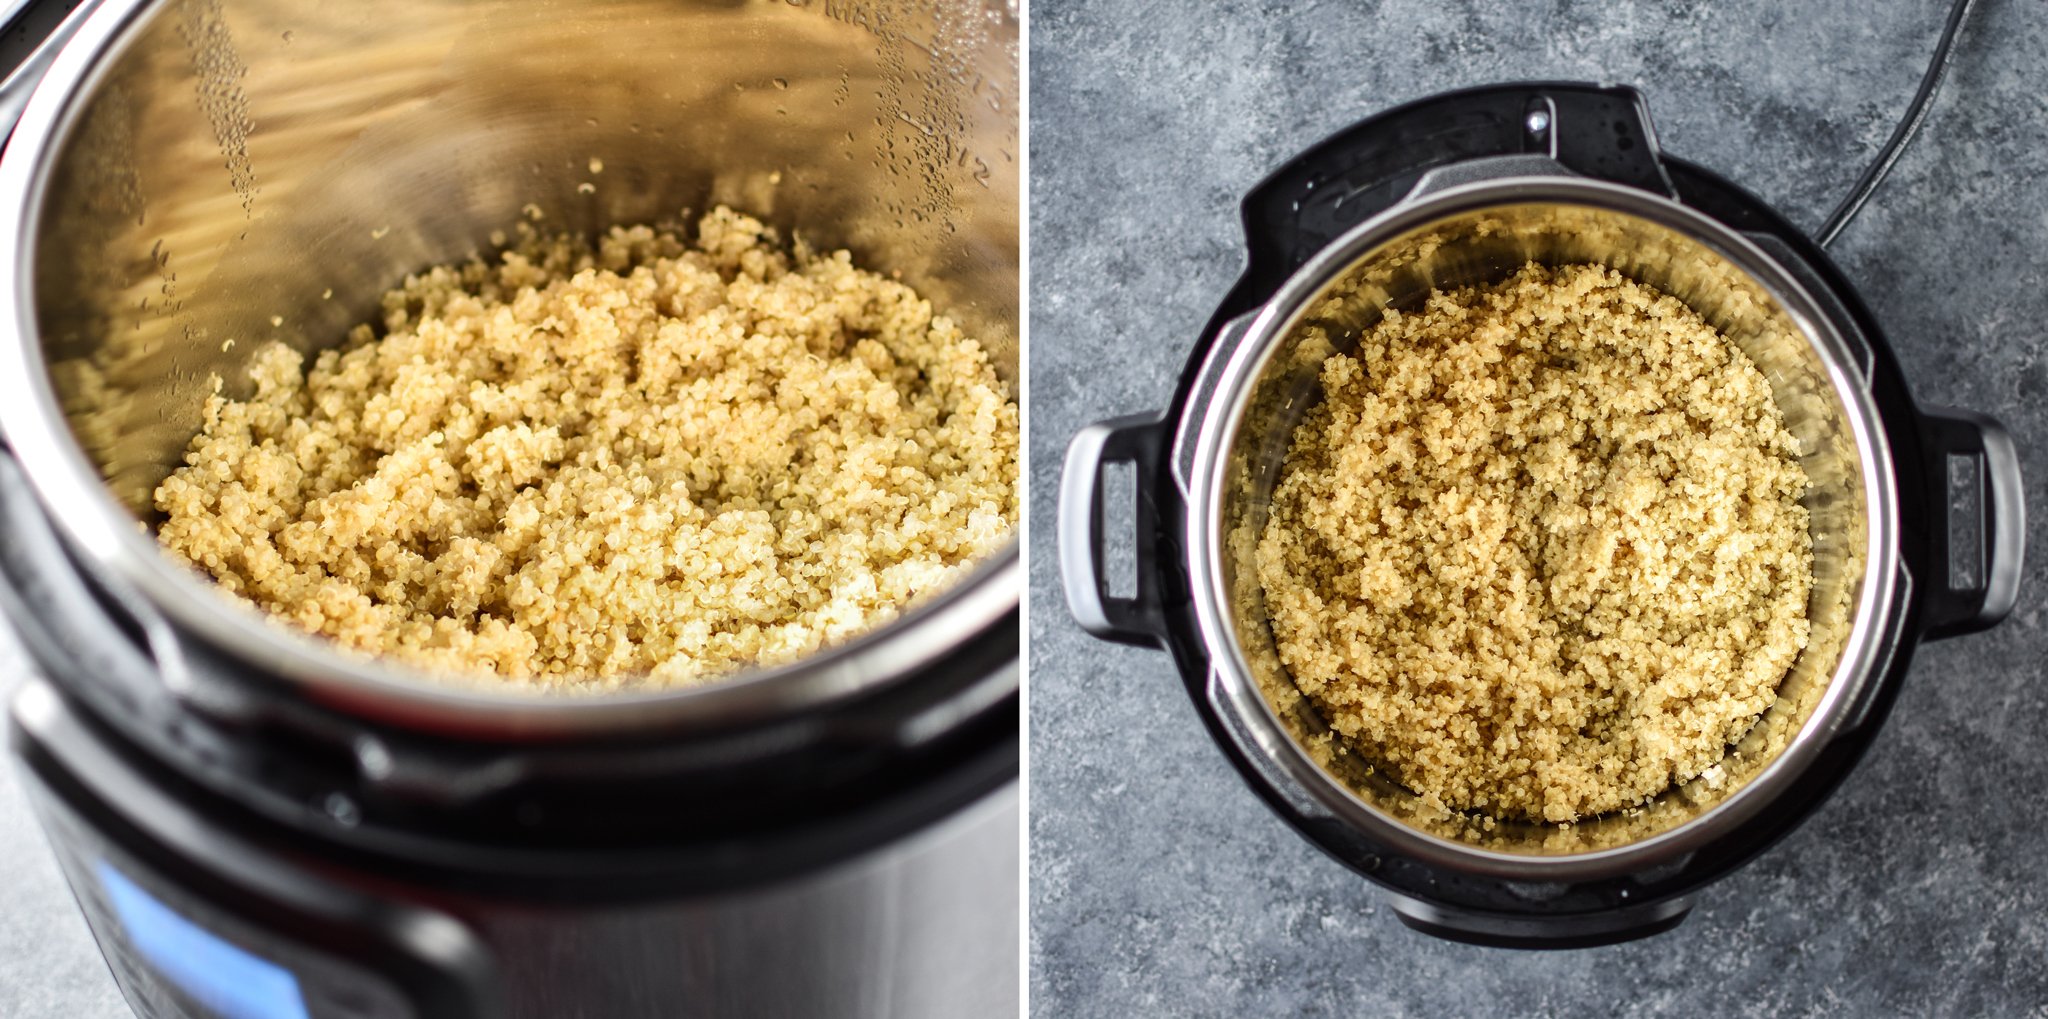 Cooked quinoa in the Instant Pot with two views - one seen from straight above and one from a side angle.